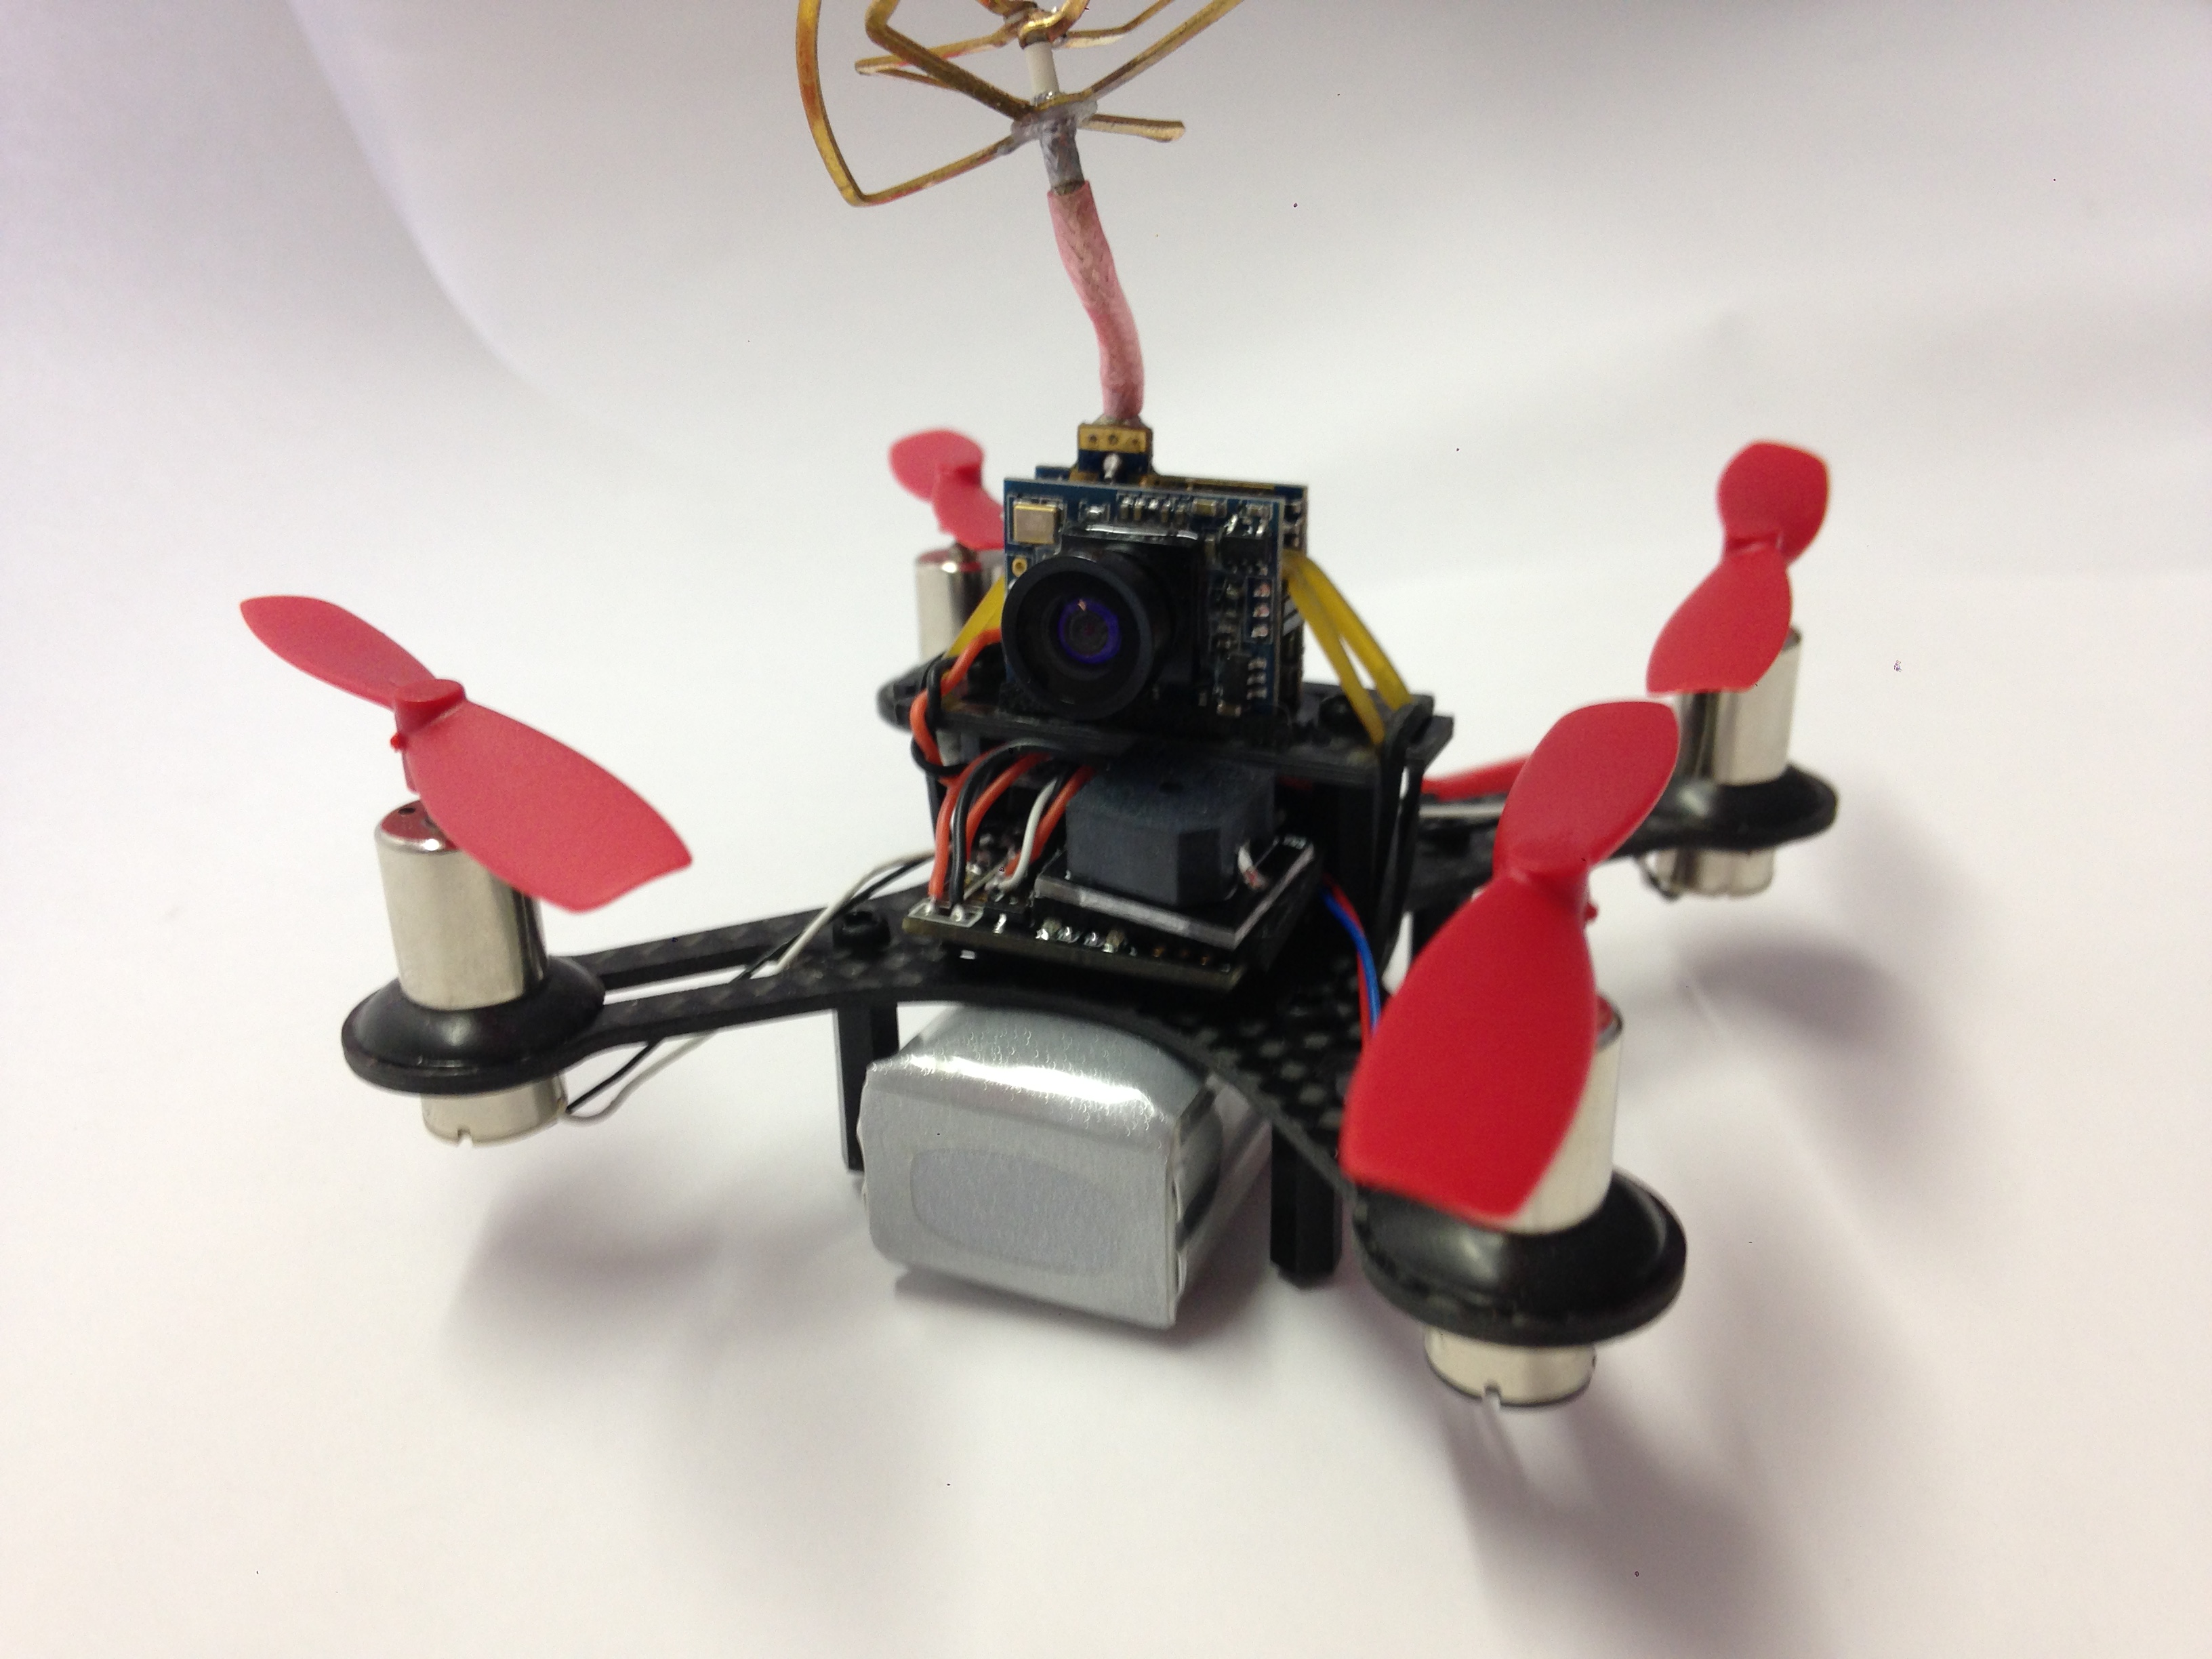 Bind QX90 tiny drone with a DSM receiver